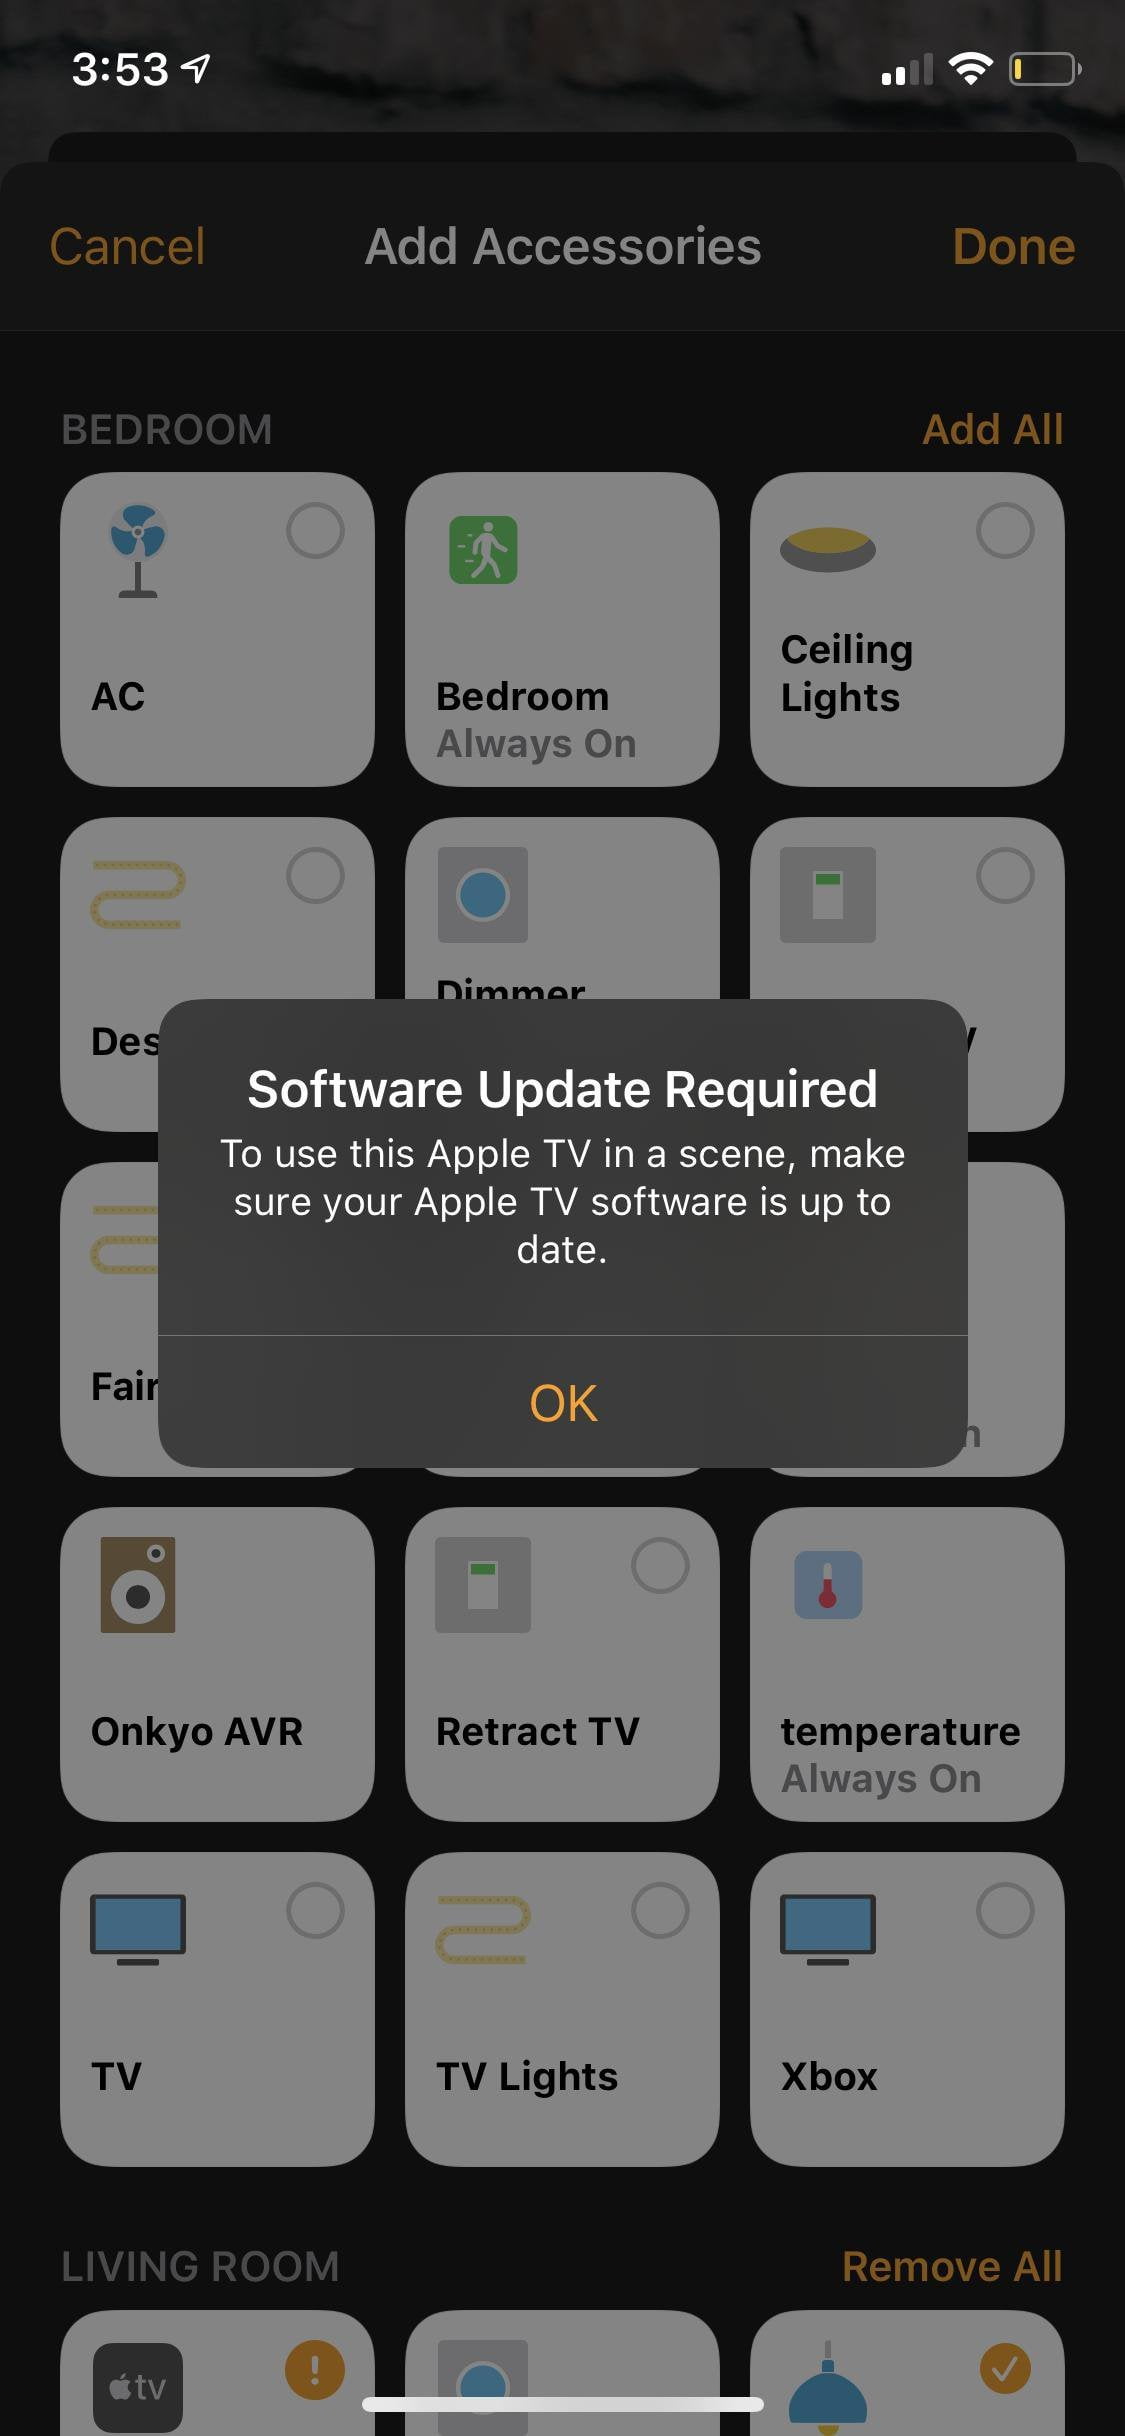 Im trying to add my Apple TV to a HomeKit